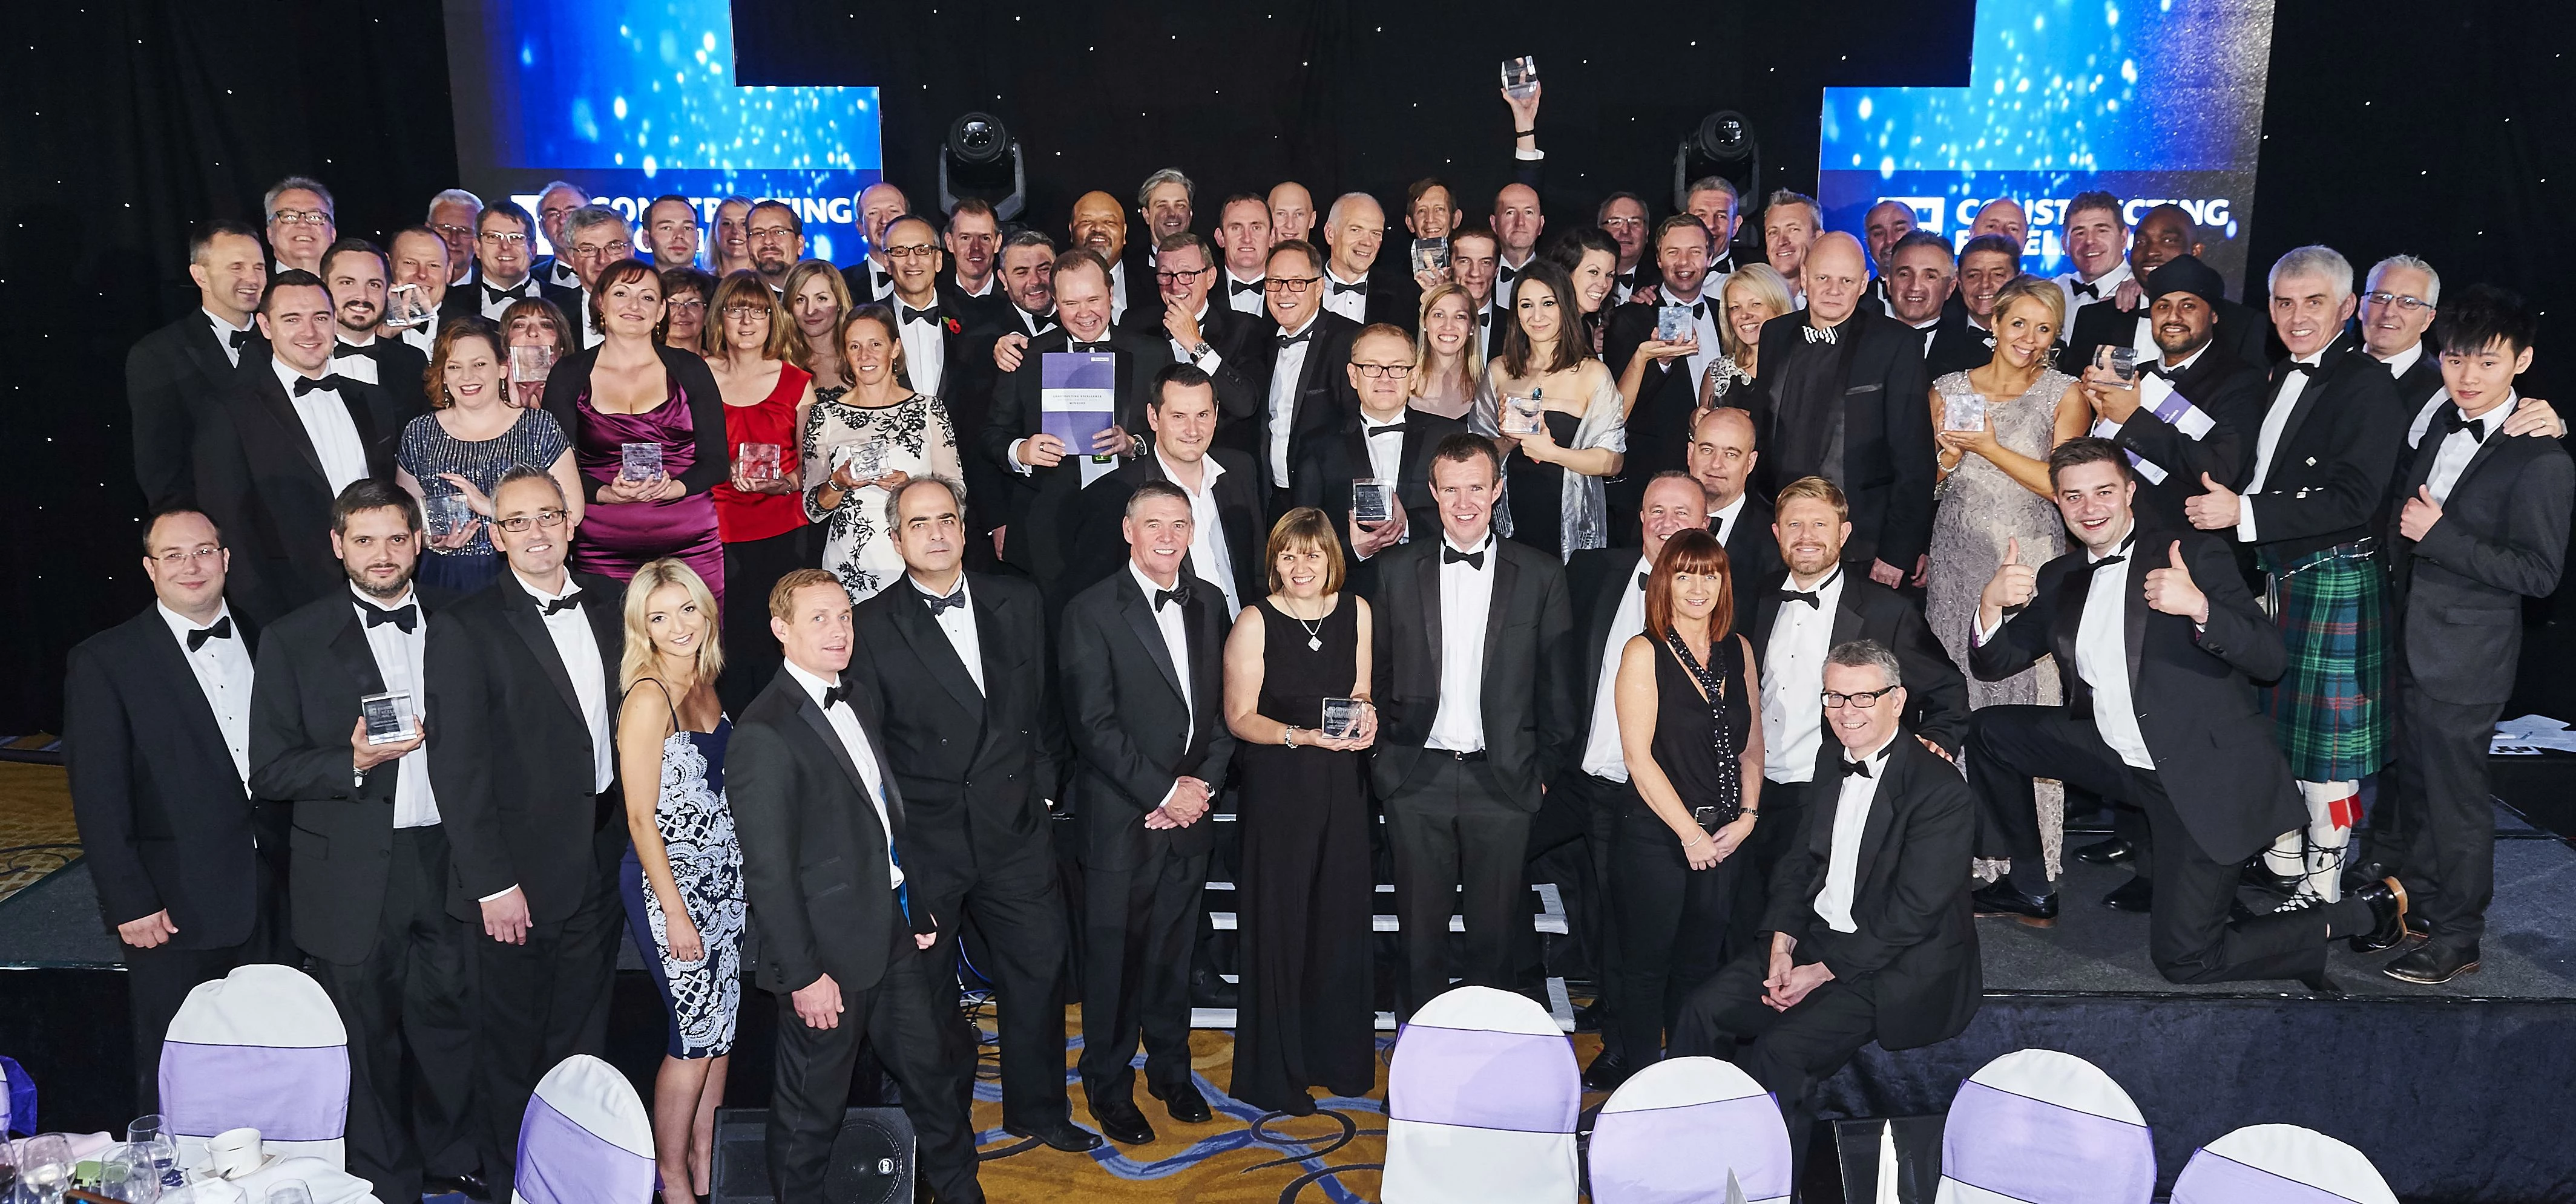 Winners of the Ninth Constructing Excellence National Awards 